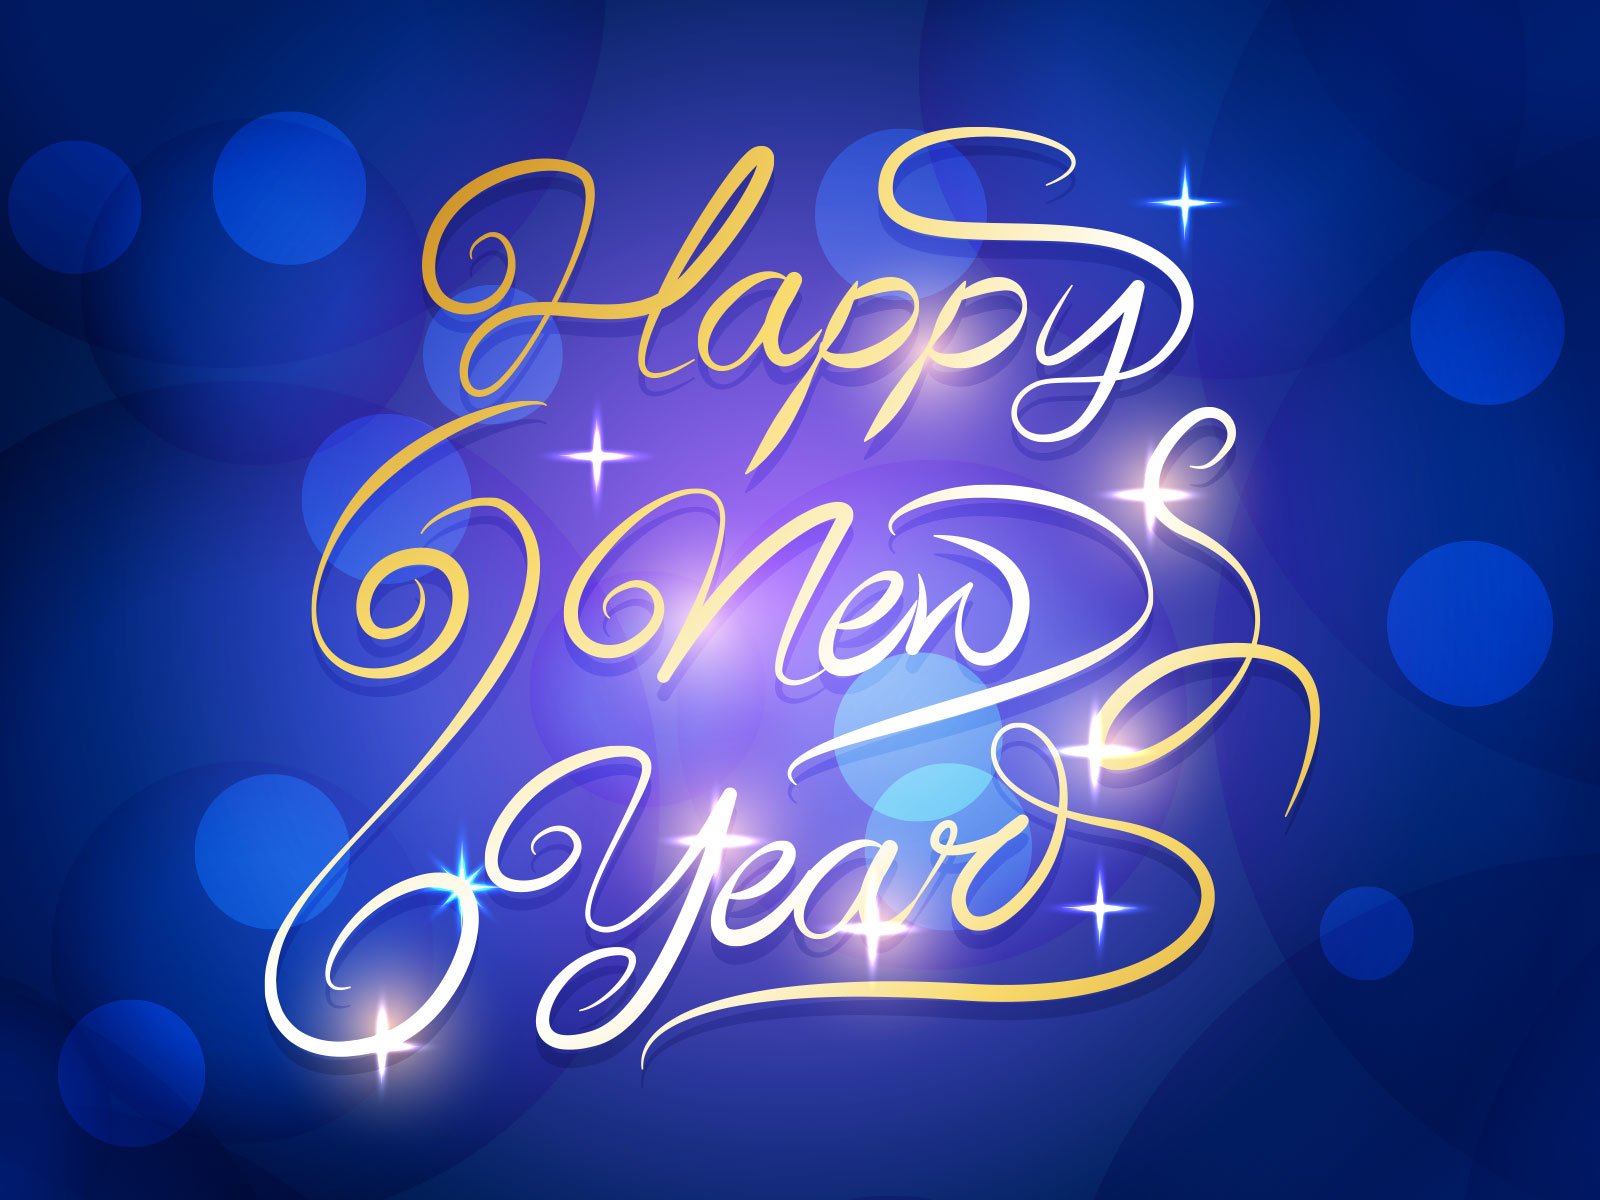 Happy New Year 2015 Wallpapers Images Facebook Cover photos 1600x1200